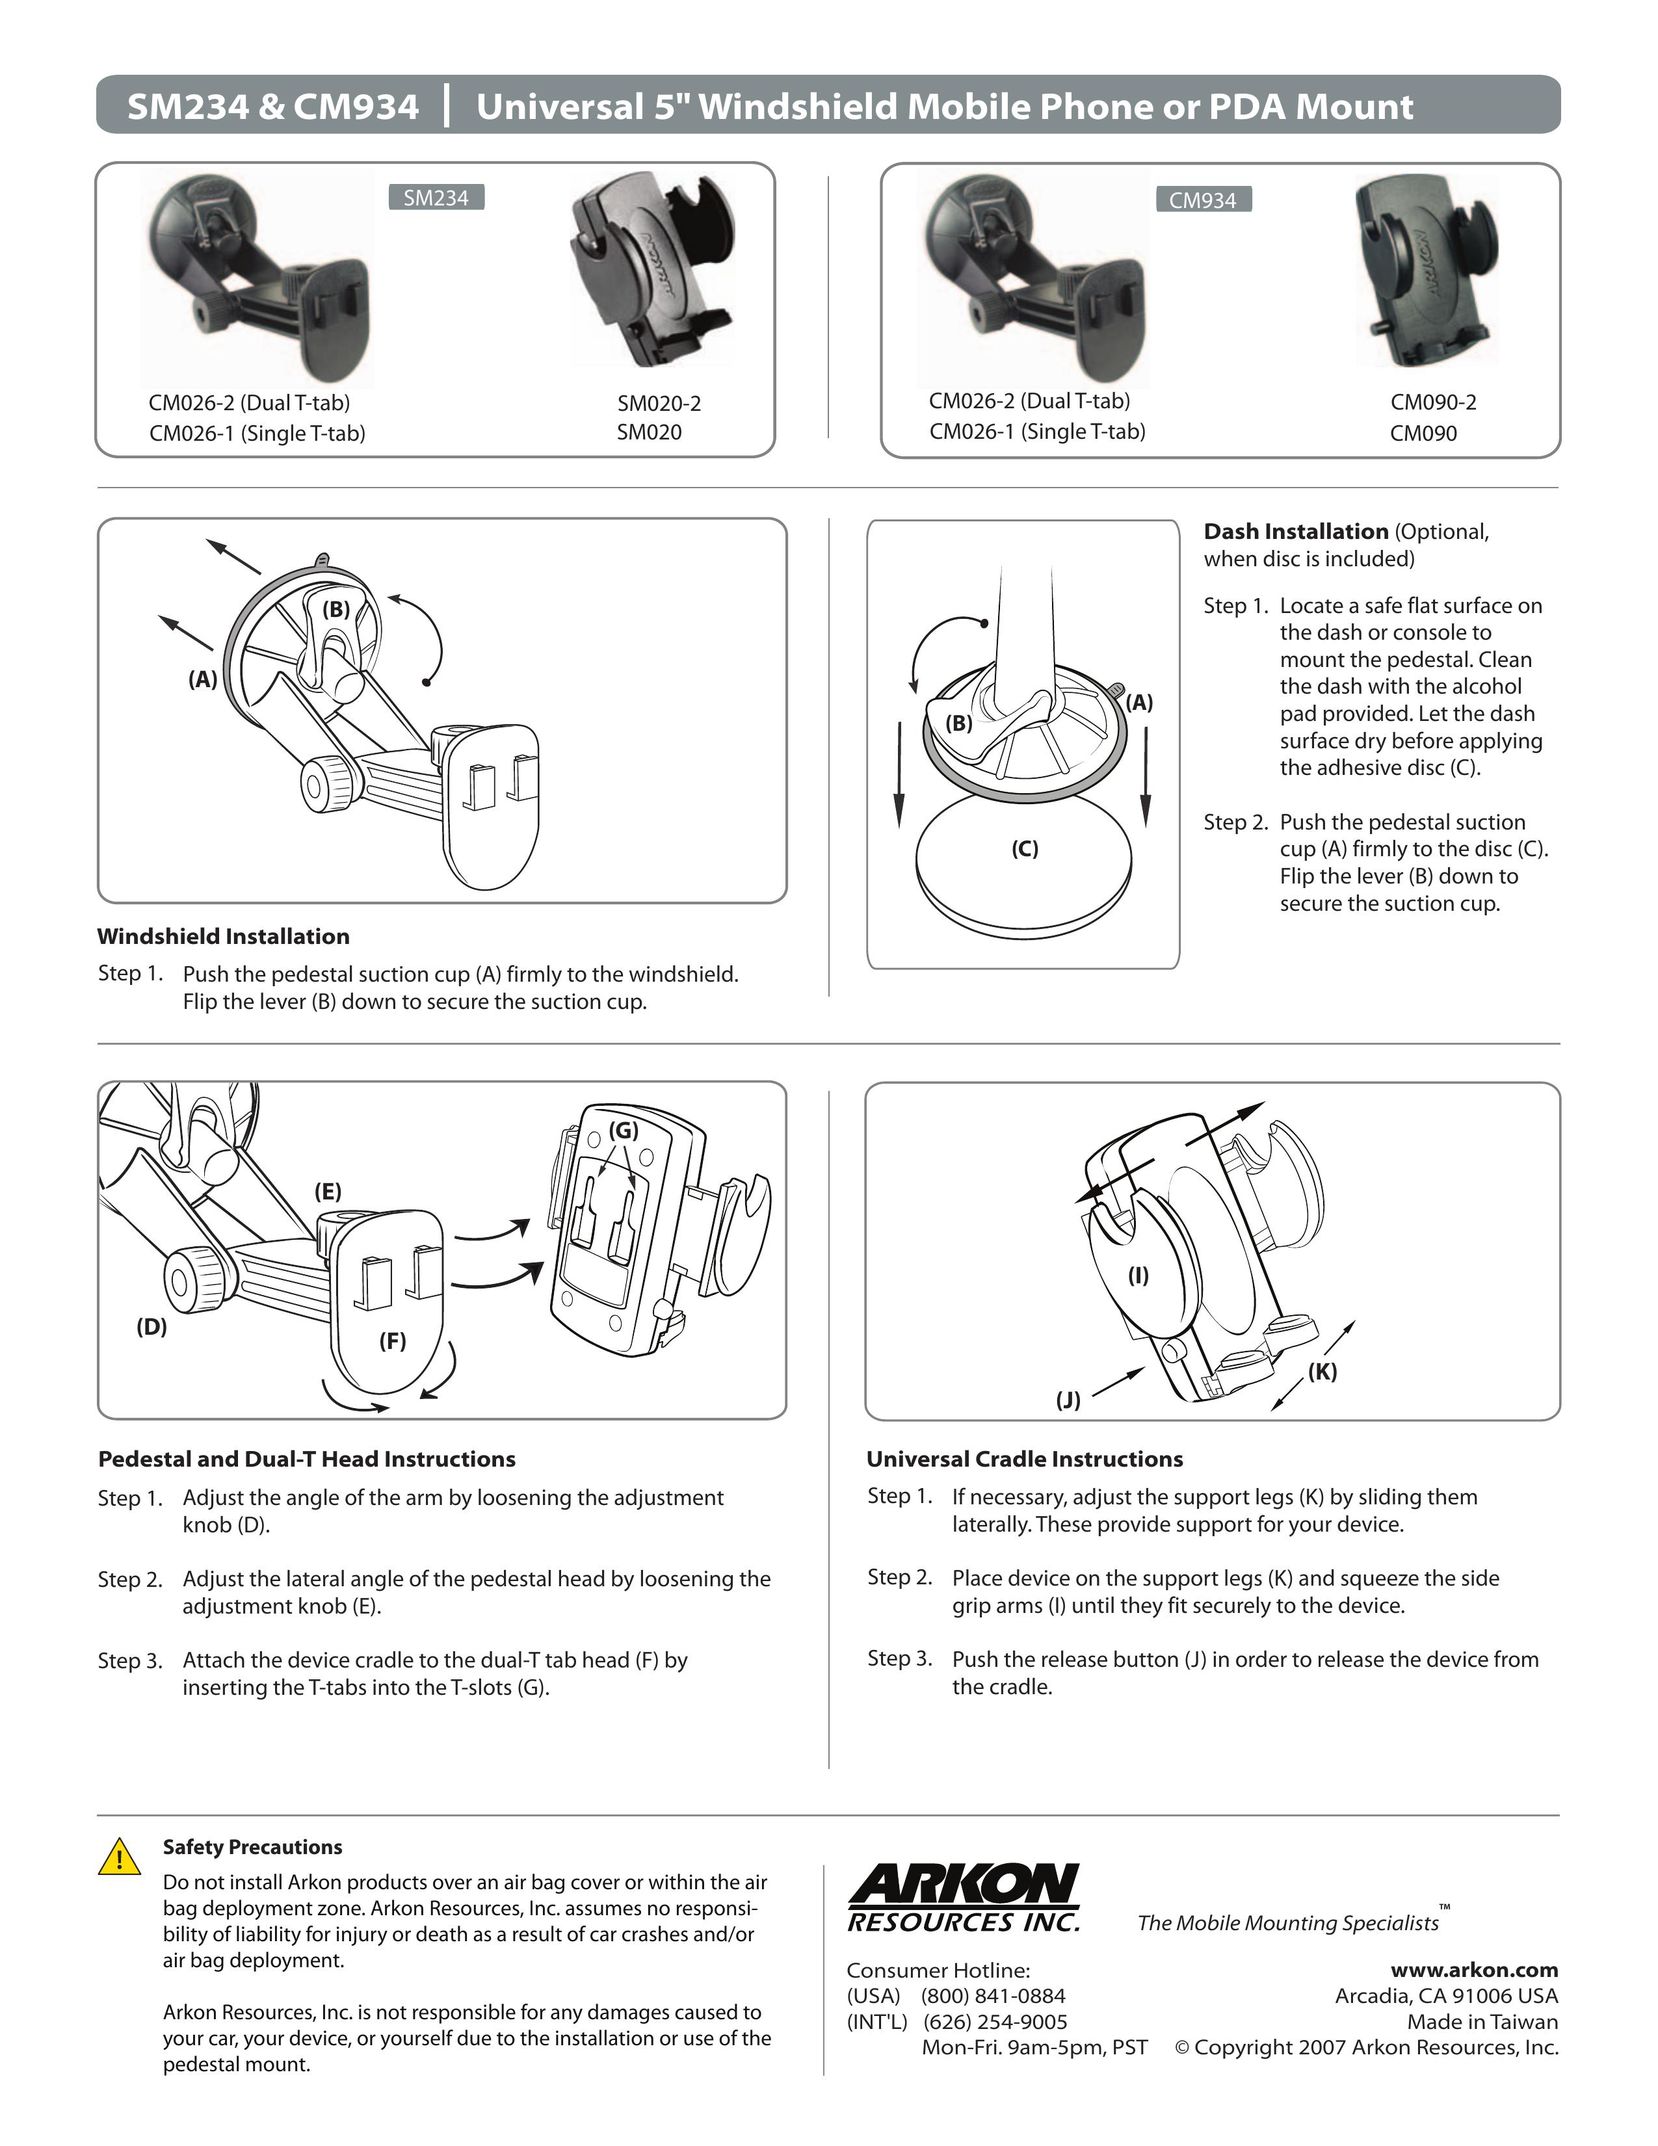 Arkon SM234 Cell Phone Accessories User Manual